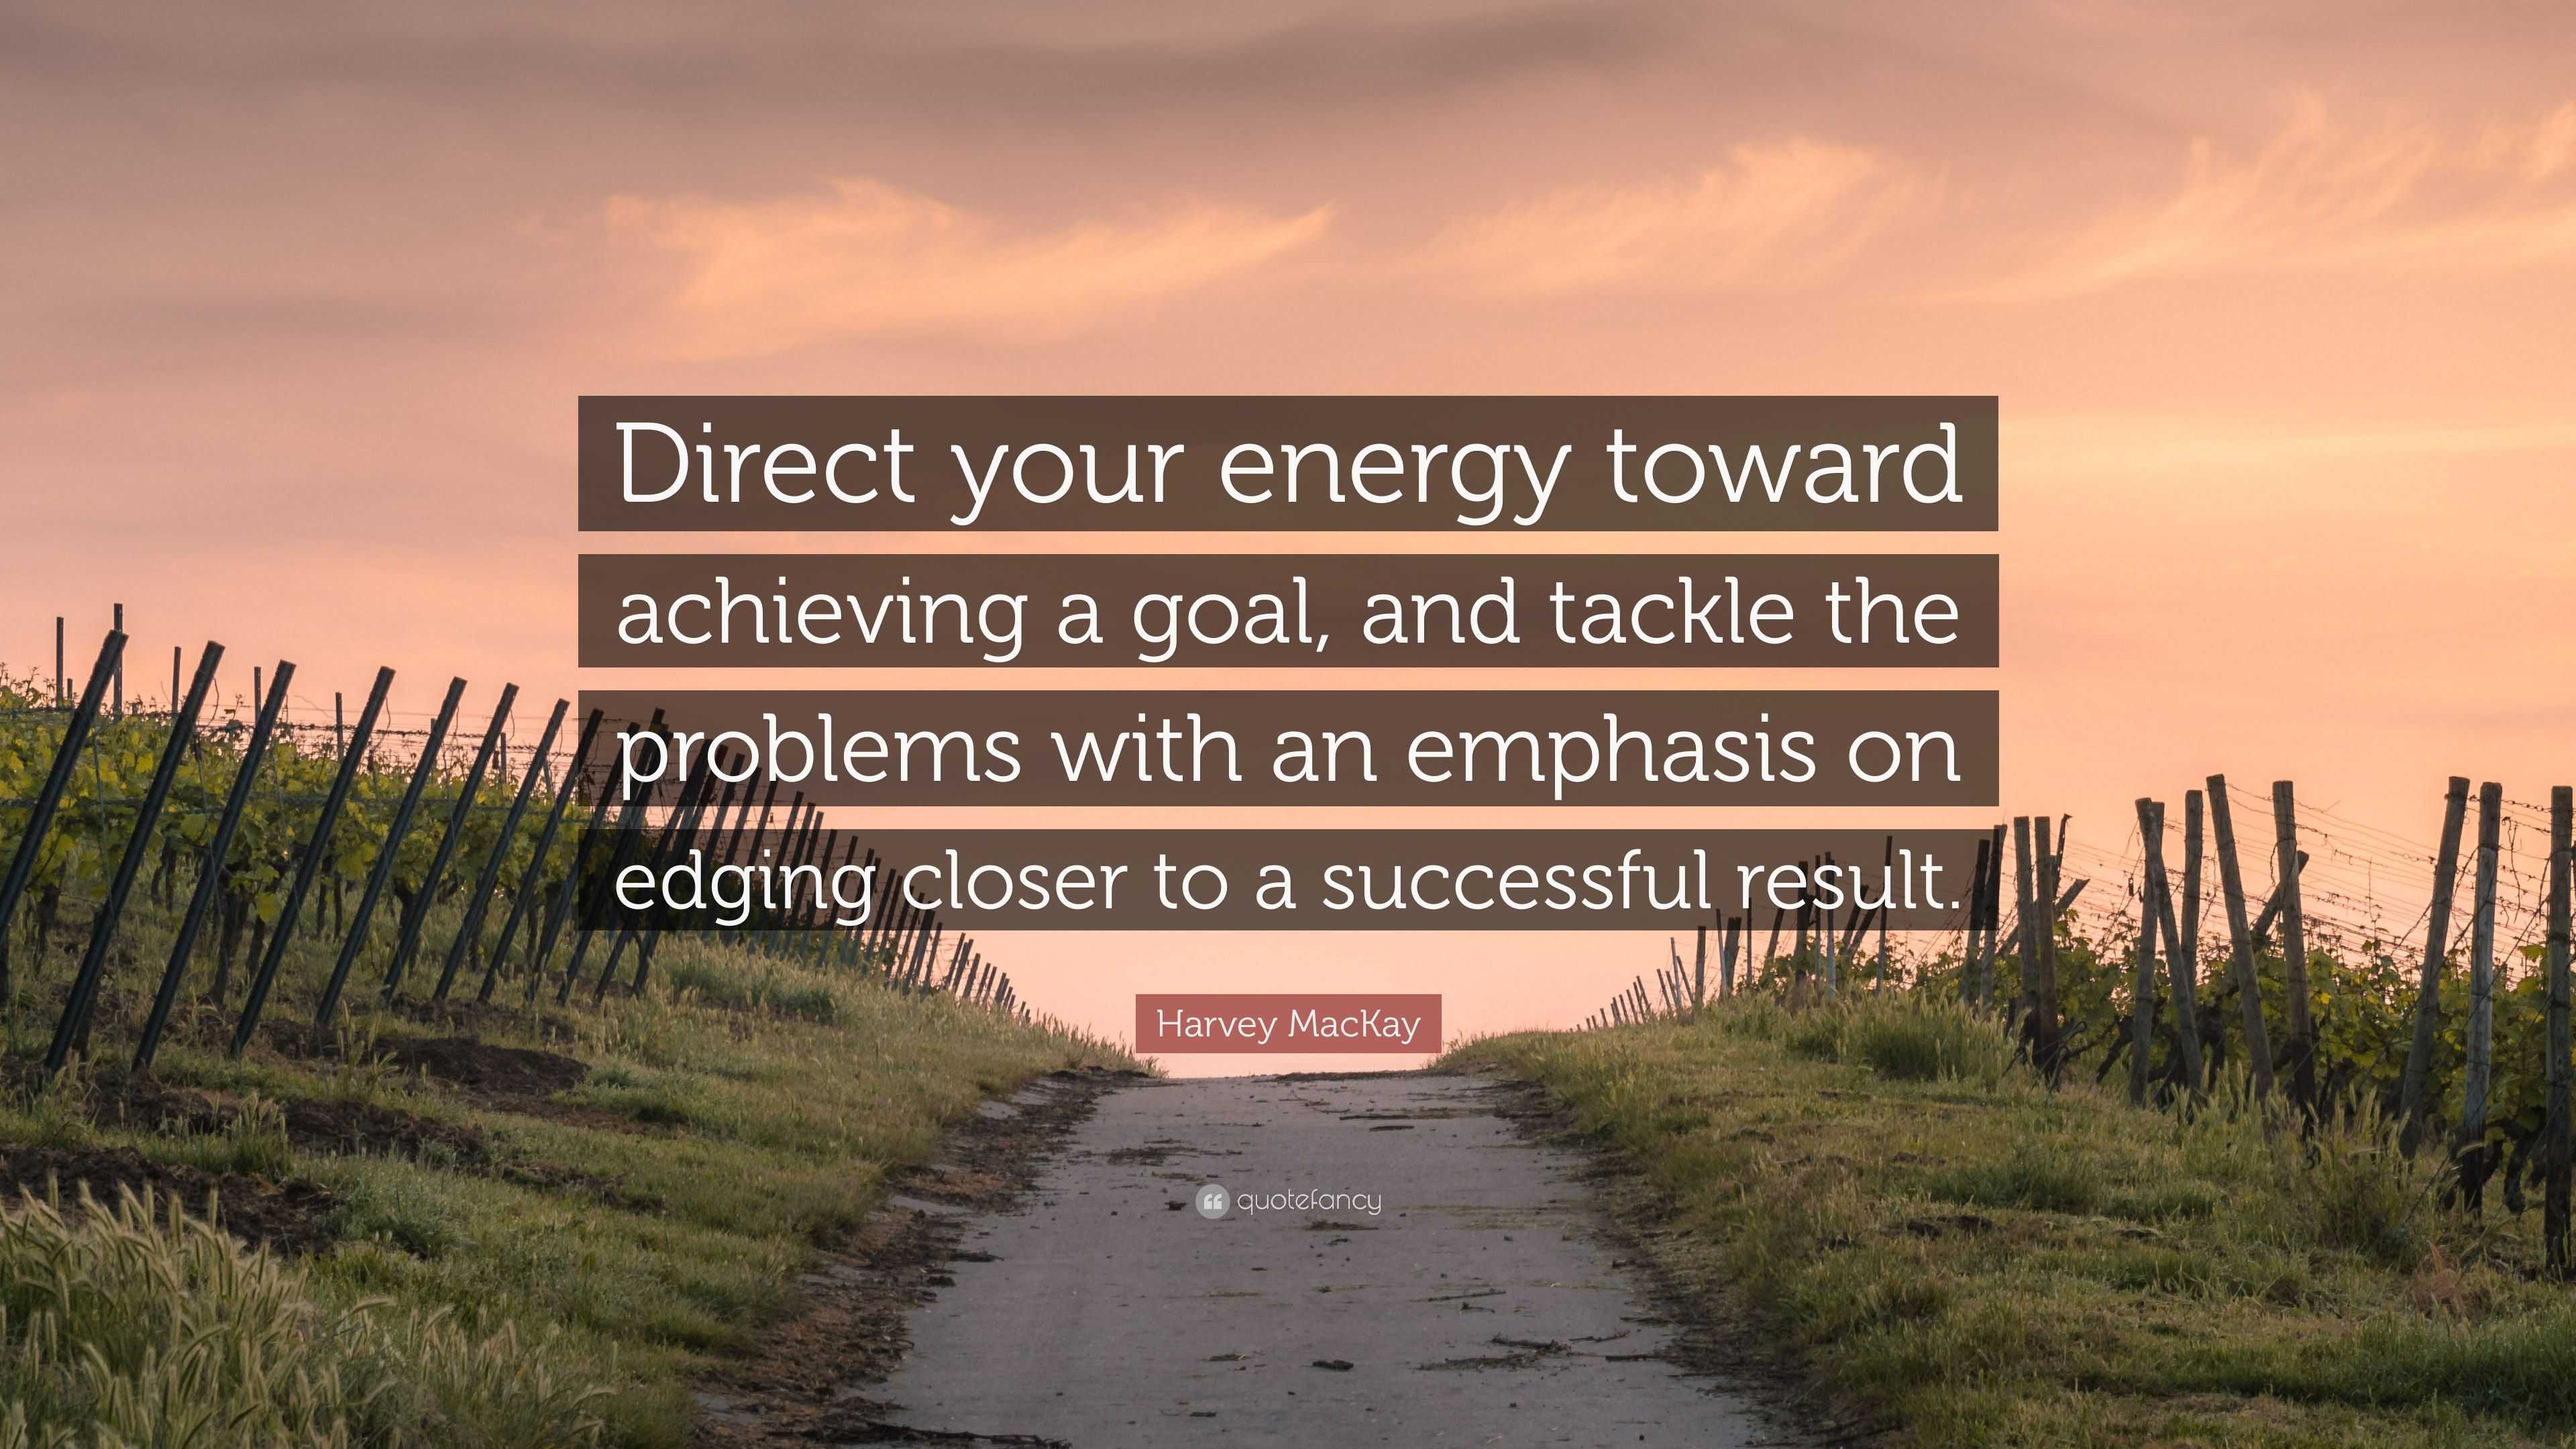 Harvey MacKay Quote: “Direct your energy toward achieving a goal